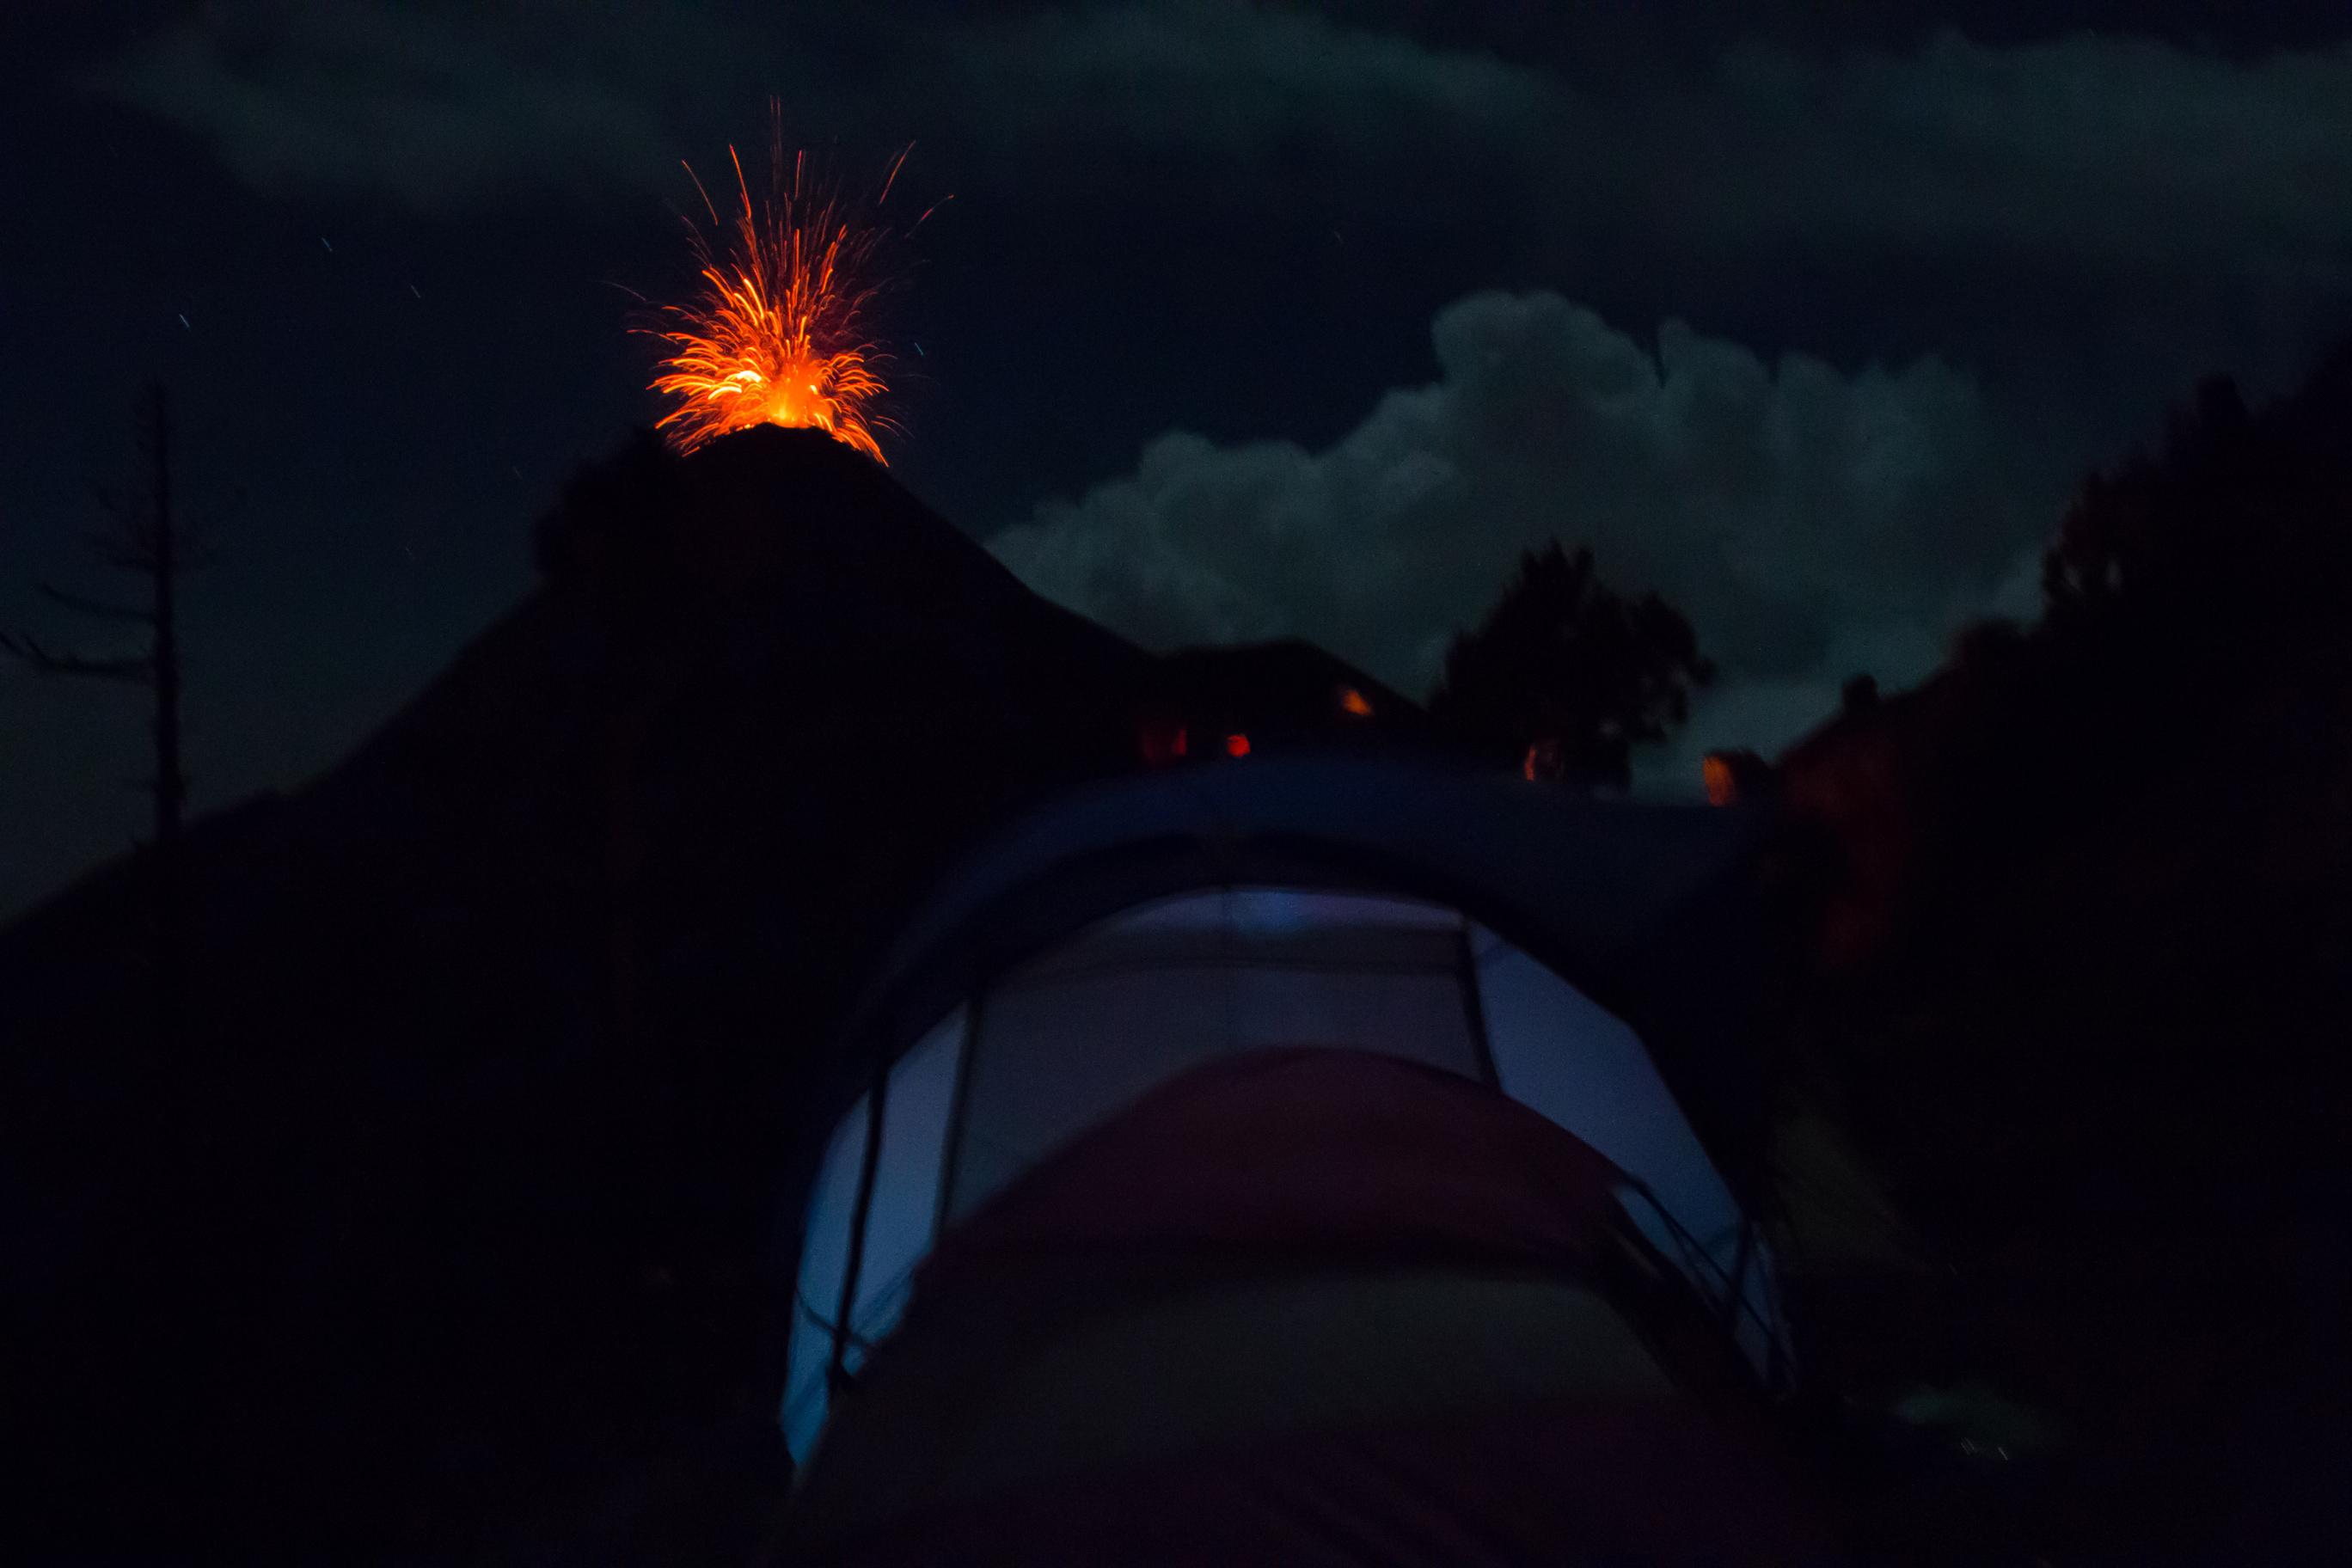 Watching the eruptions from camp